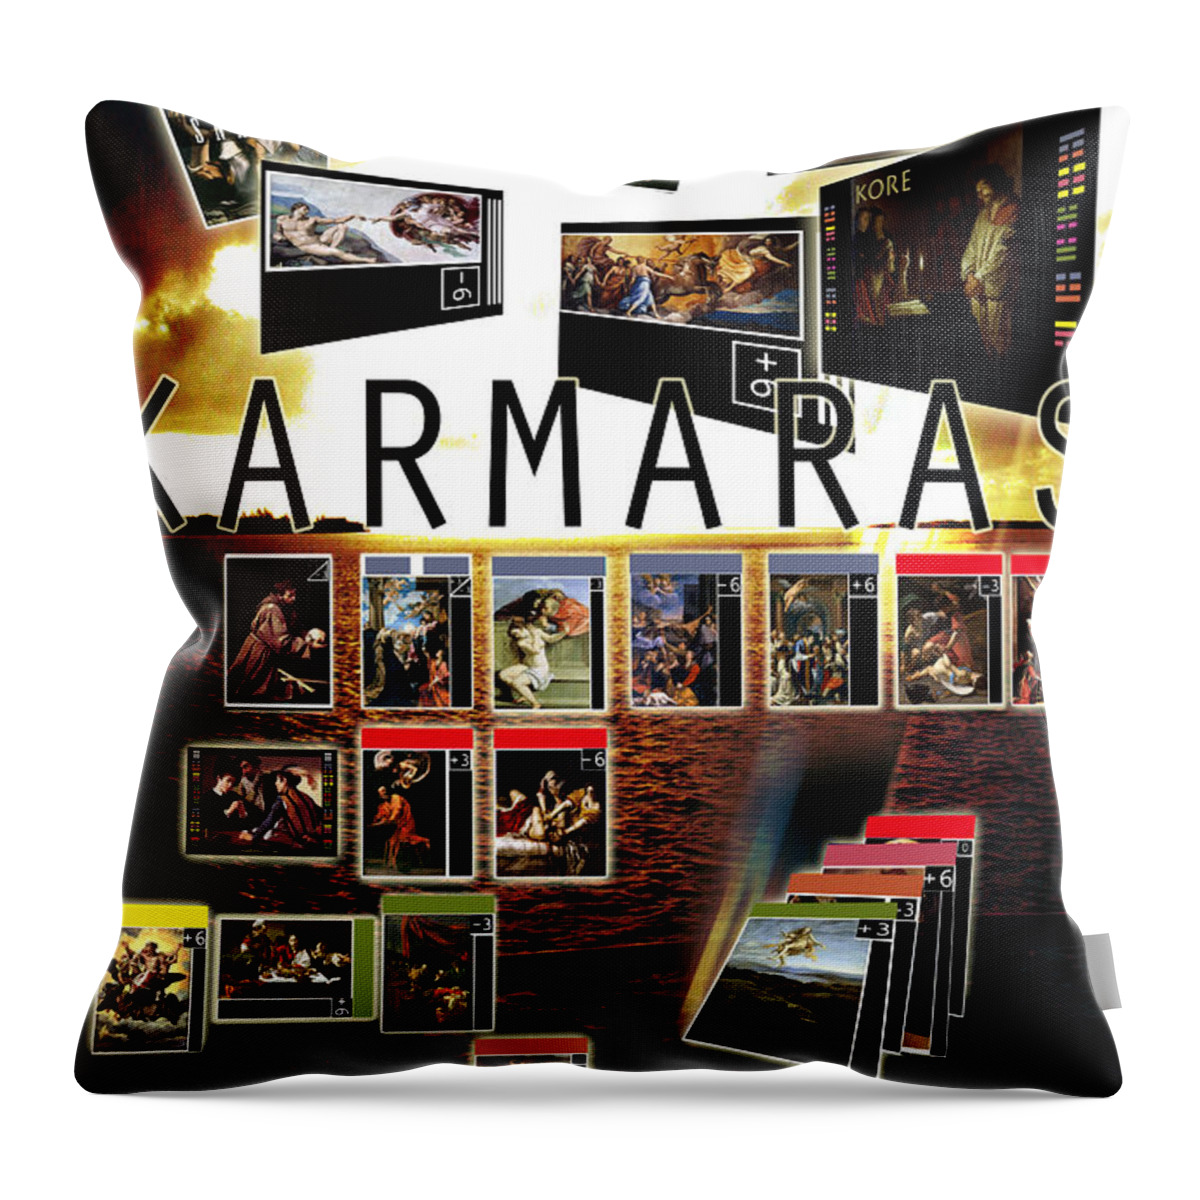  Throw Pillow featuring the painting Karmaras Poster Baroque by John Gholson